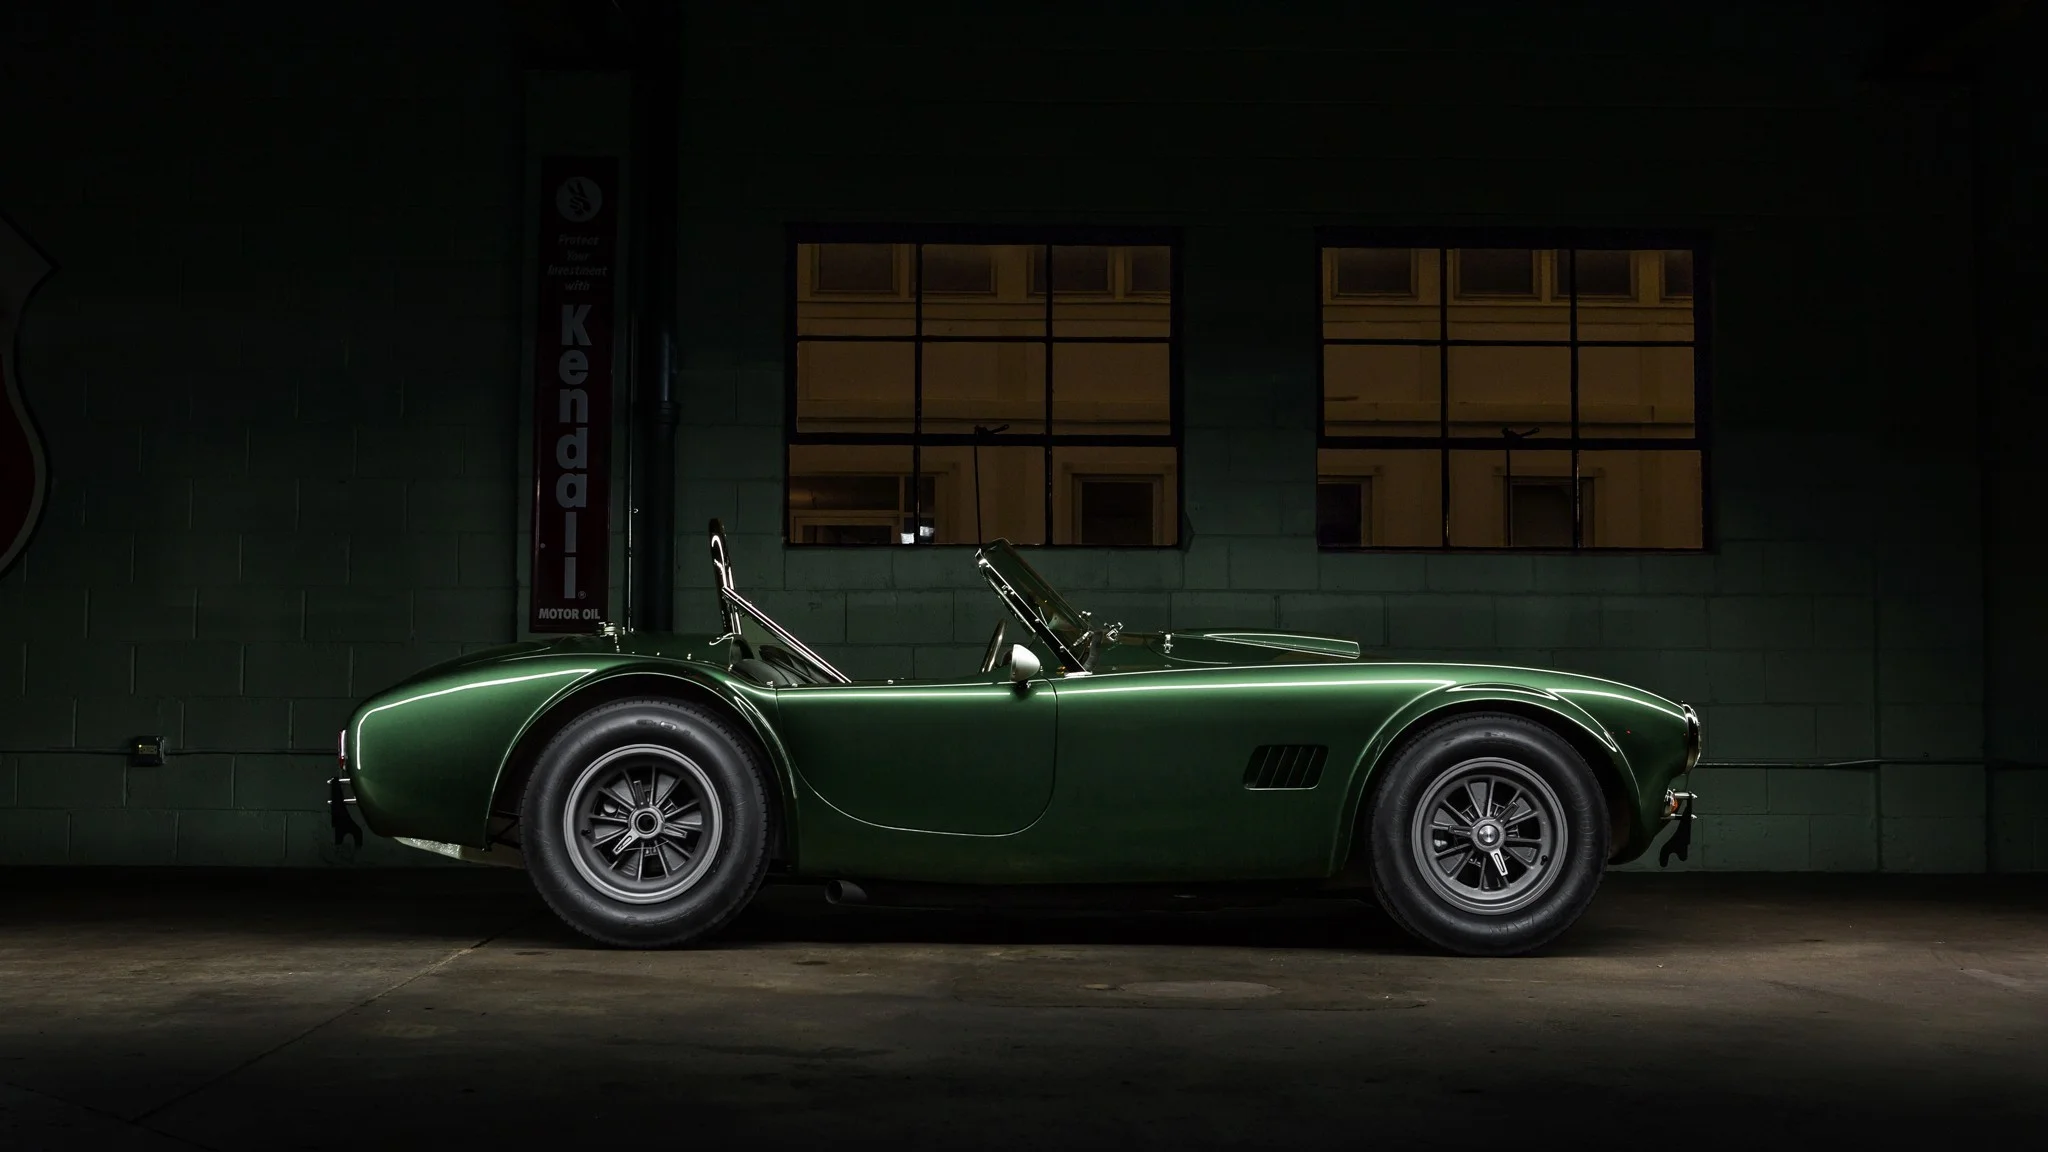 Car, Green Cars, Vehicle, Shelby, Shelby Cobra Wallpapers HD / Desktop and Mobile Backgrounds